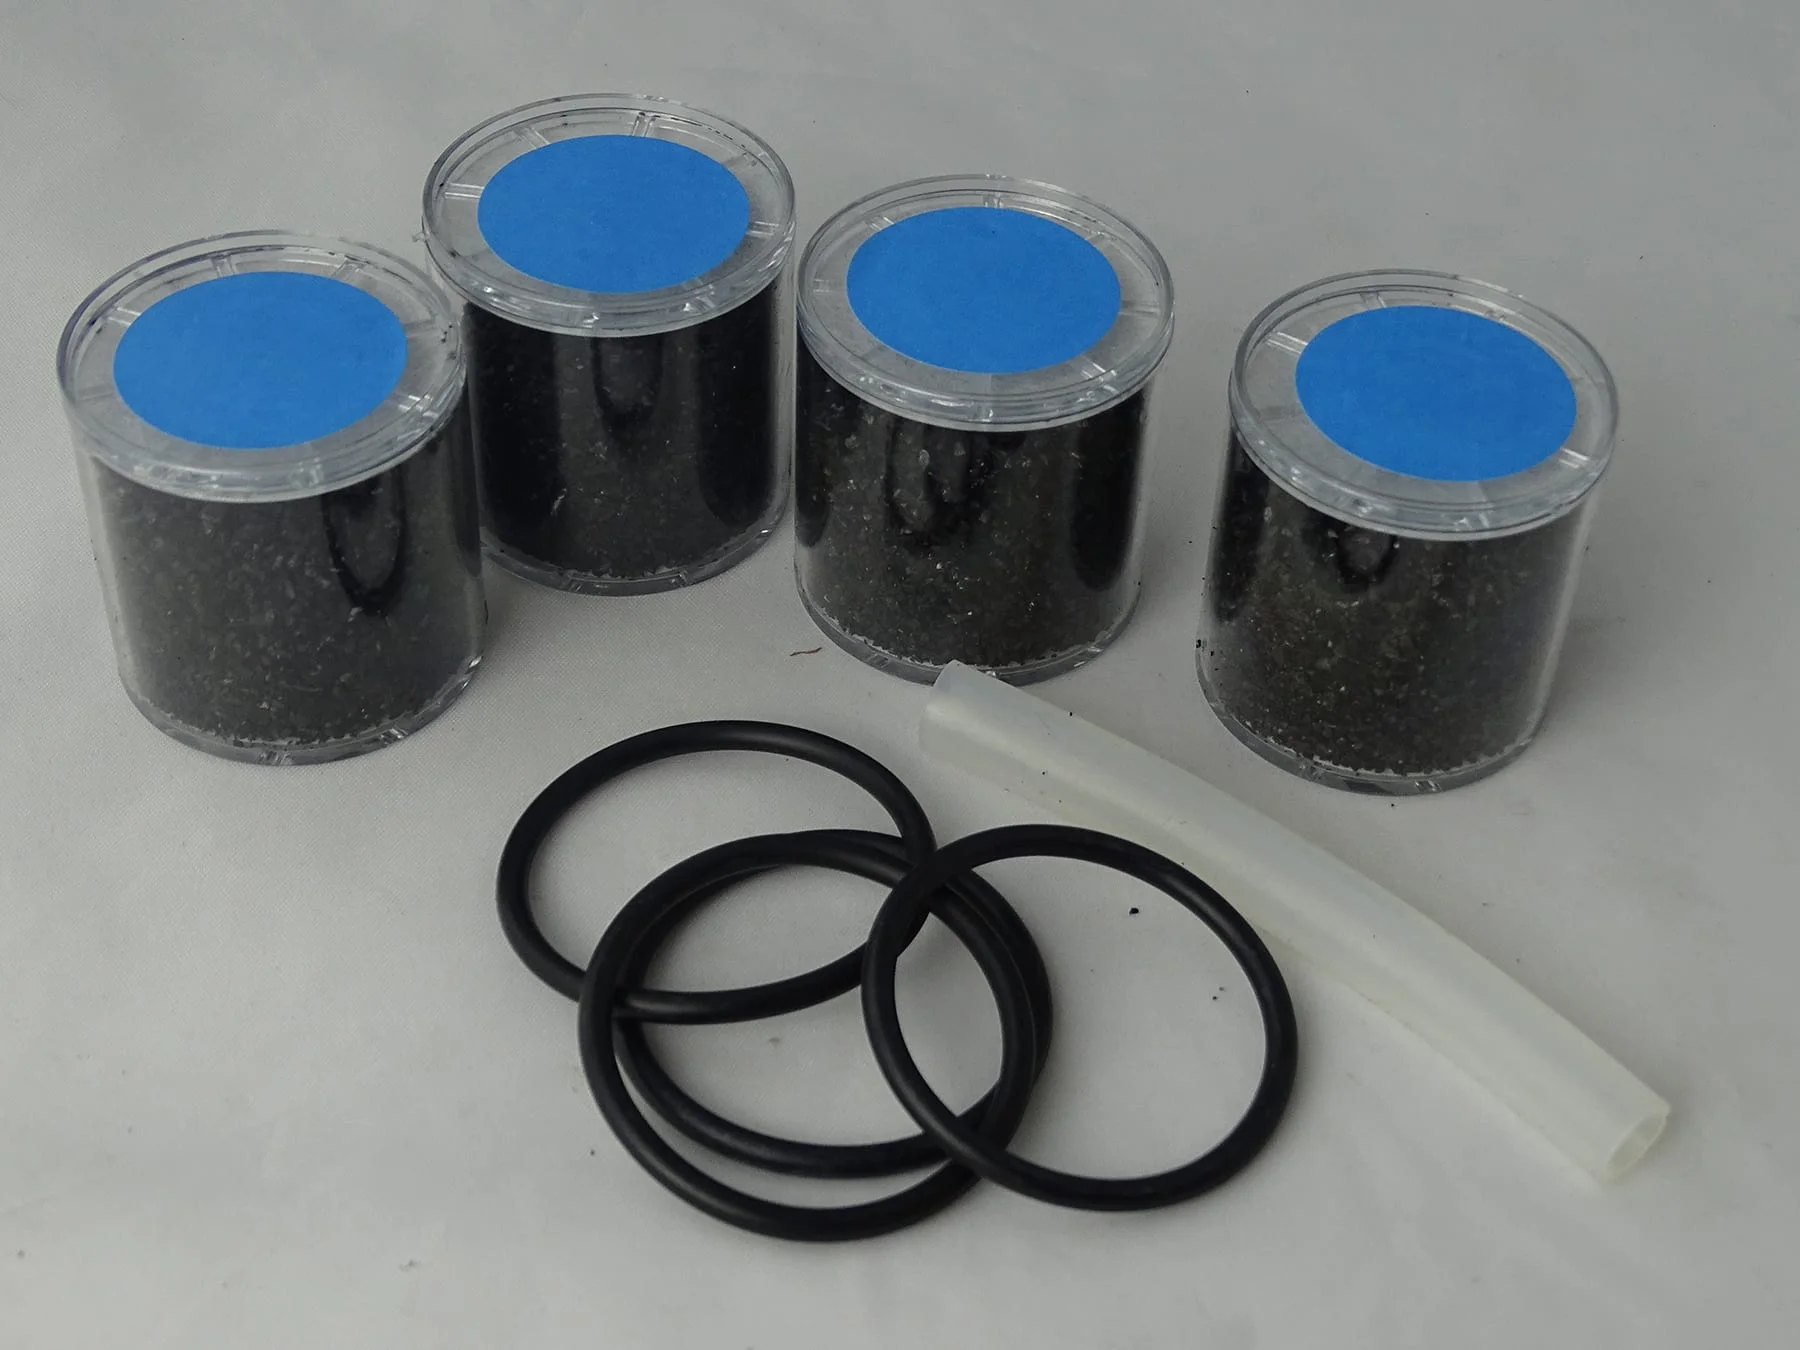 Filter 4 pack for the storage tank cup